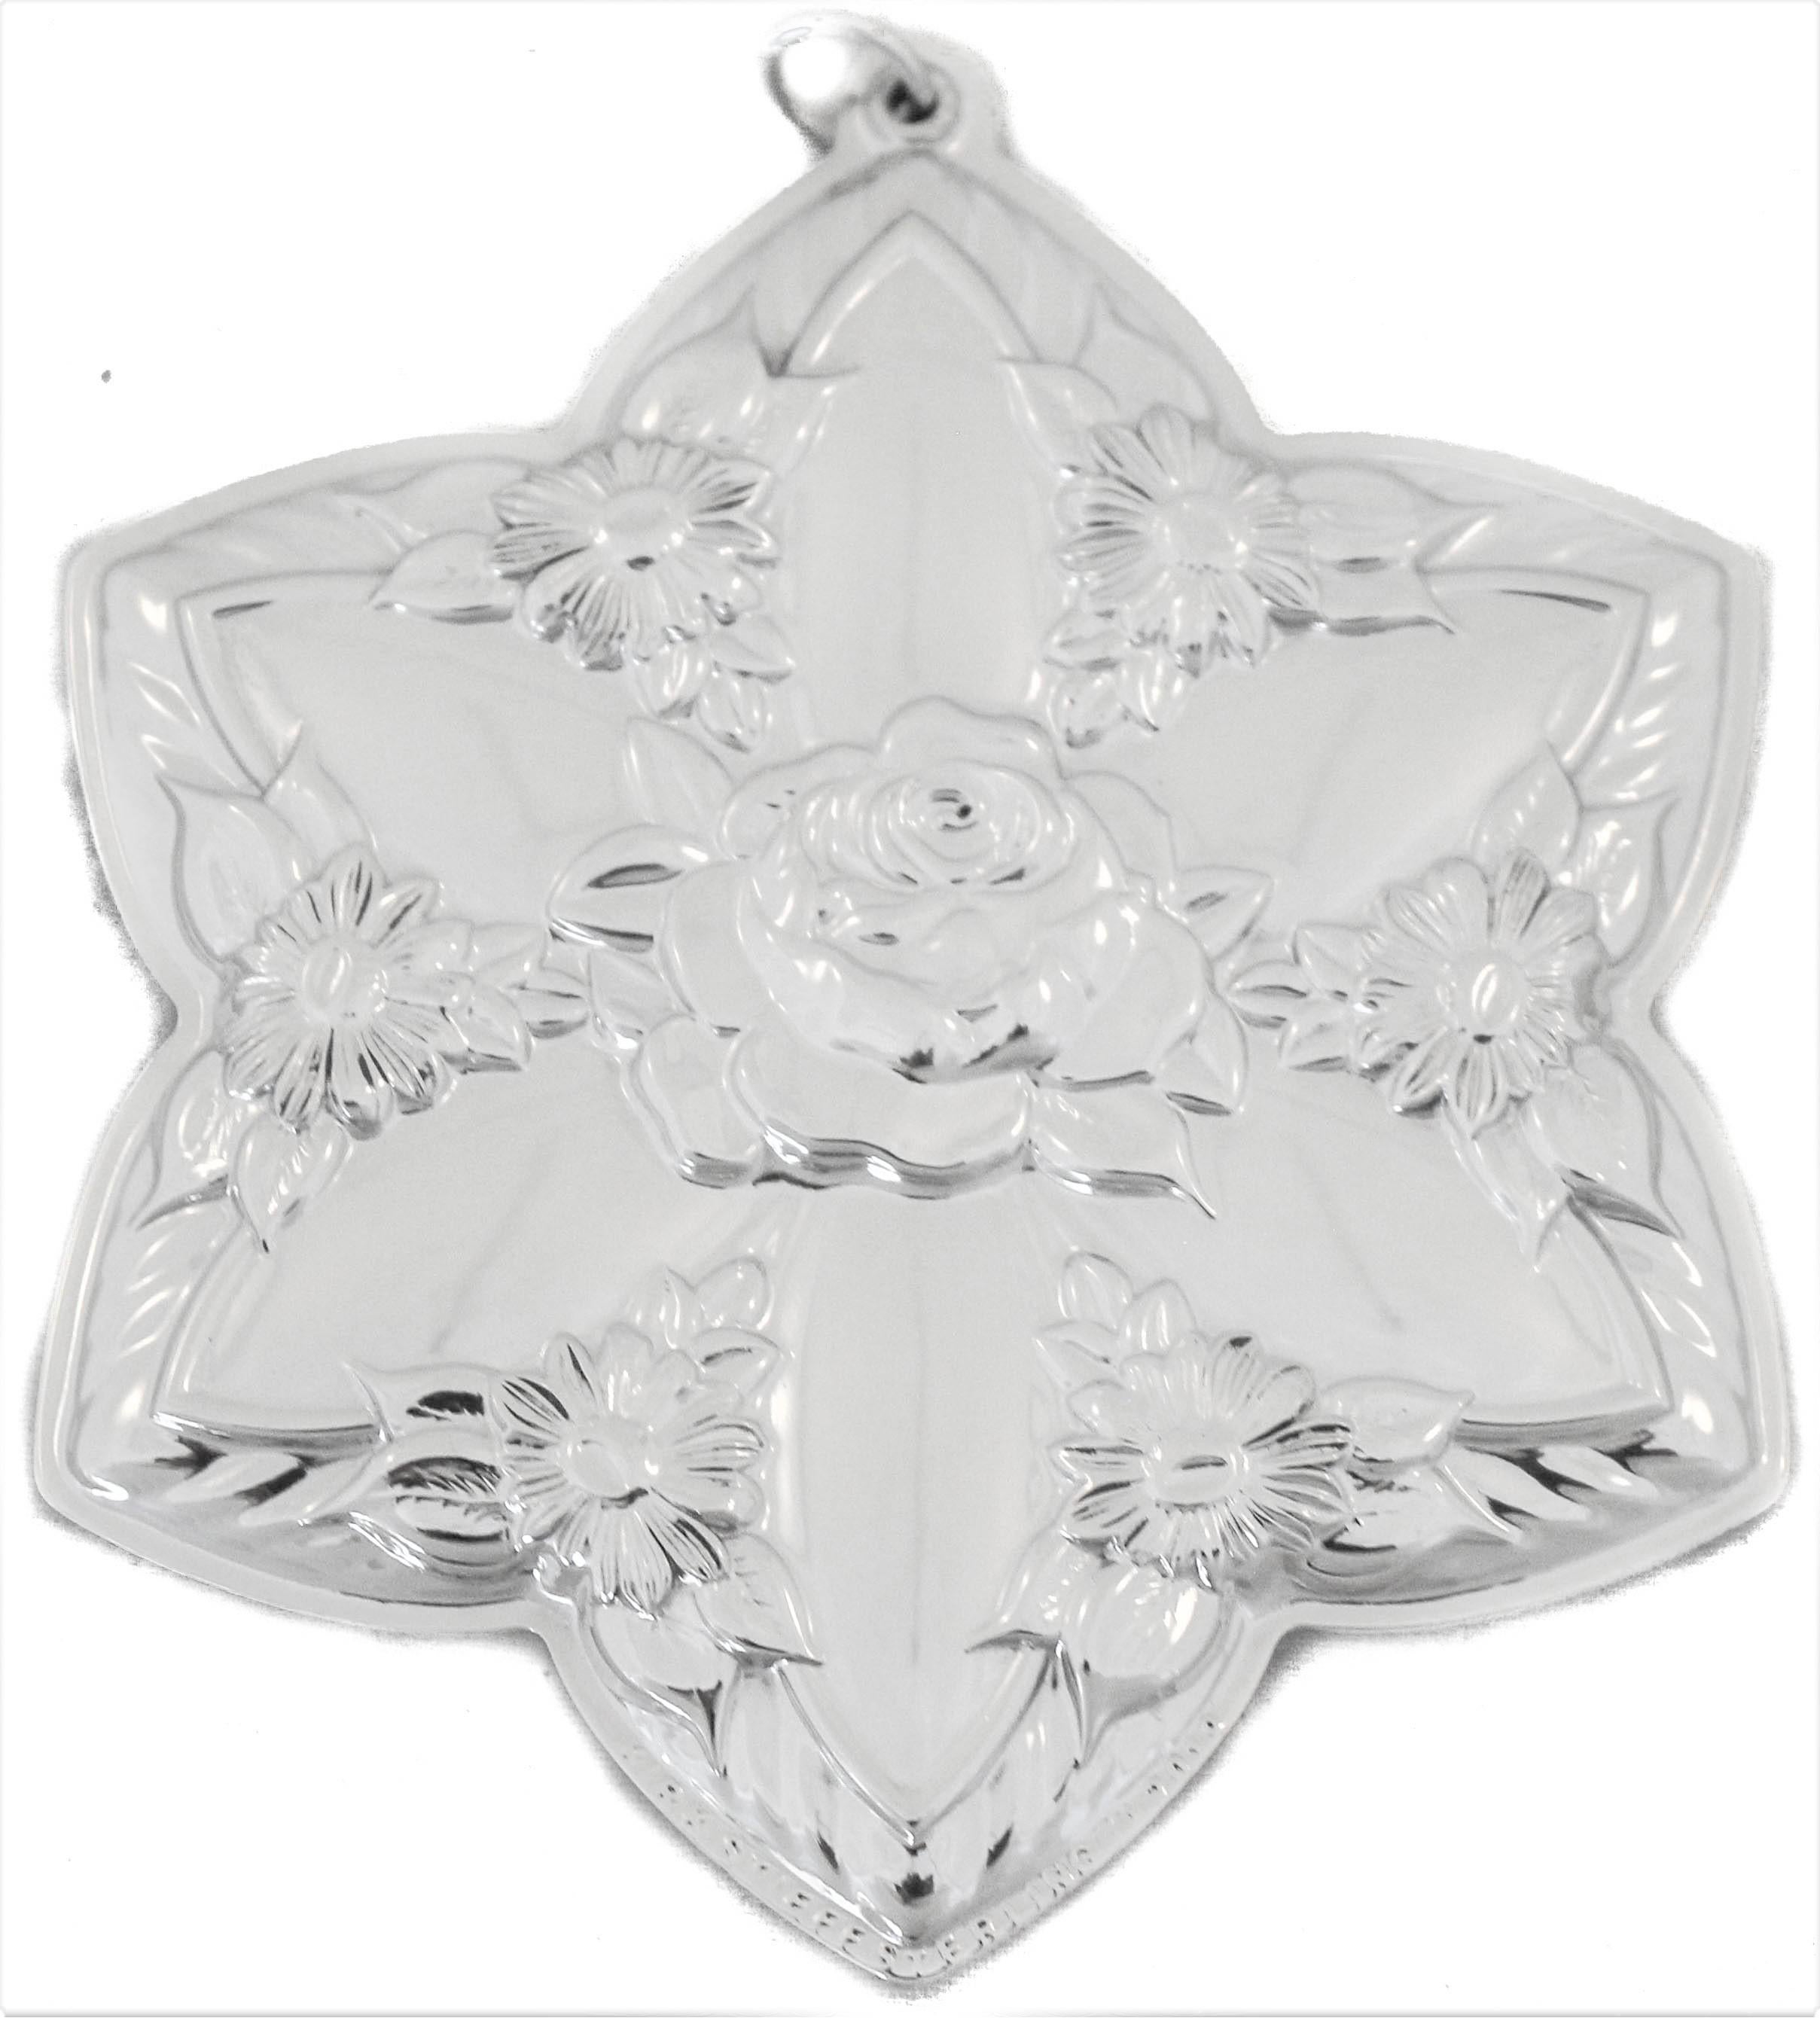 We are happy to offer you this sterling silver Christmas ornament by the Kirk-Stieff Silver Company of Baltimore. It is the star with flowers along the edge as well as a larger flower in the center. Both sides have the same design so you need not